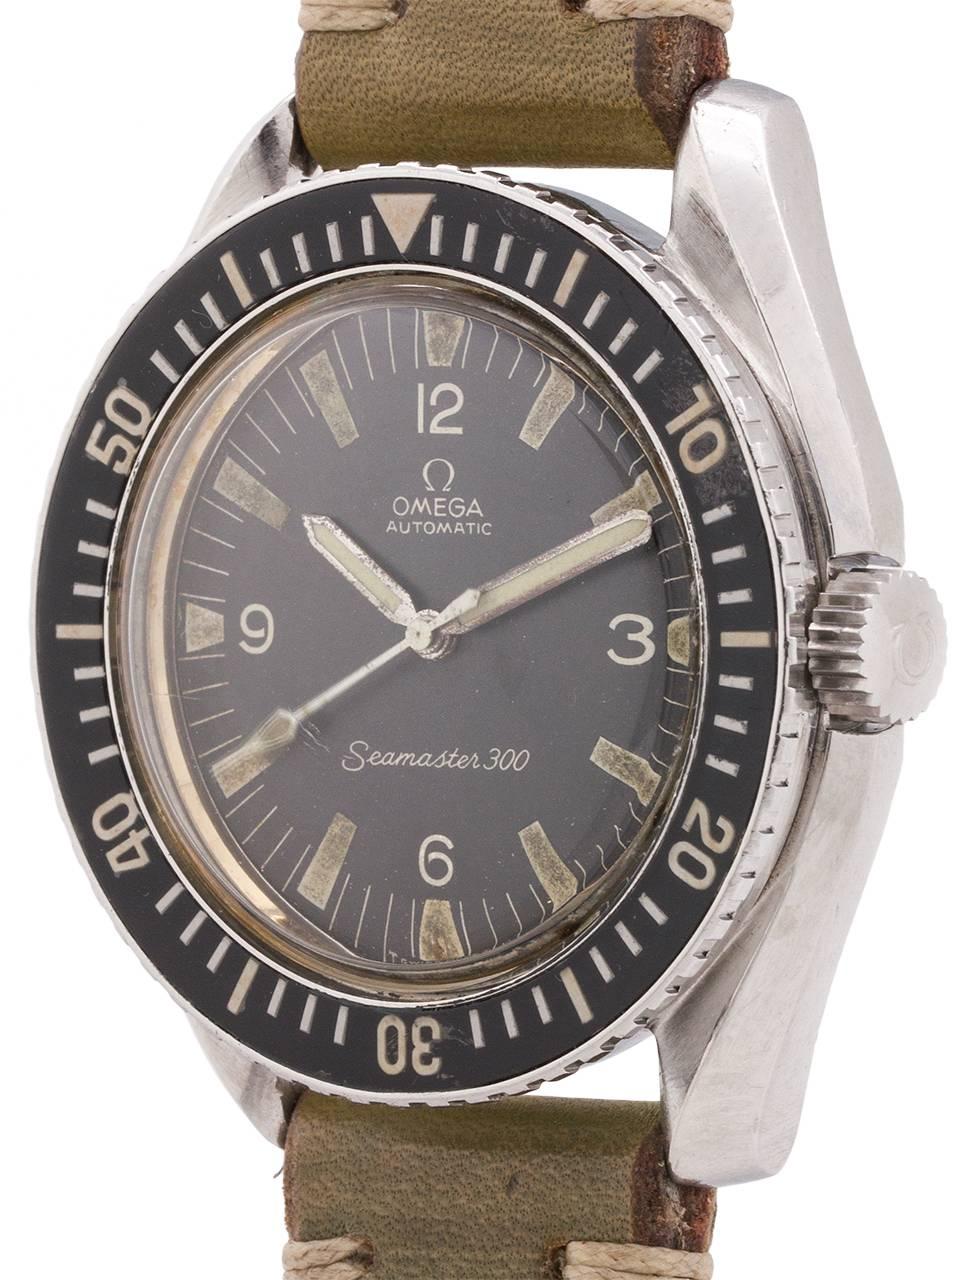 
Omega stainless steel Seamaster 300 ref# 165 024 movement serial# 24 million circa 1966. Featuring 42 x 47mm bombe lug case with screw down back with Hippocampus logo, with original bi-directional rotating bakelite elapsed time bezel,  and with